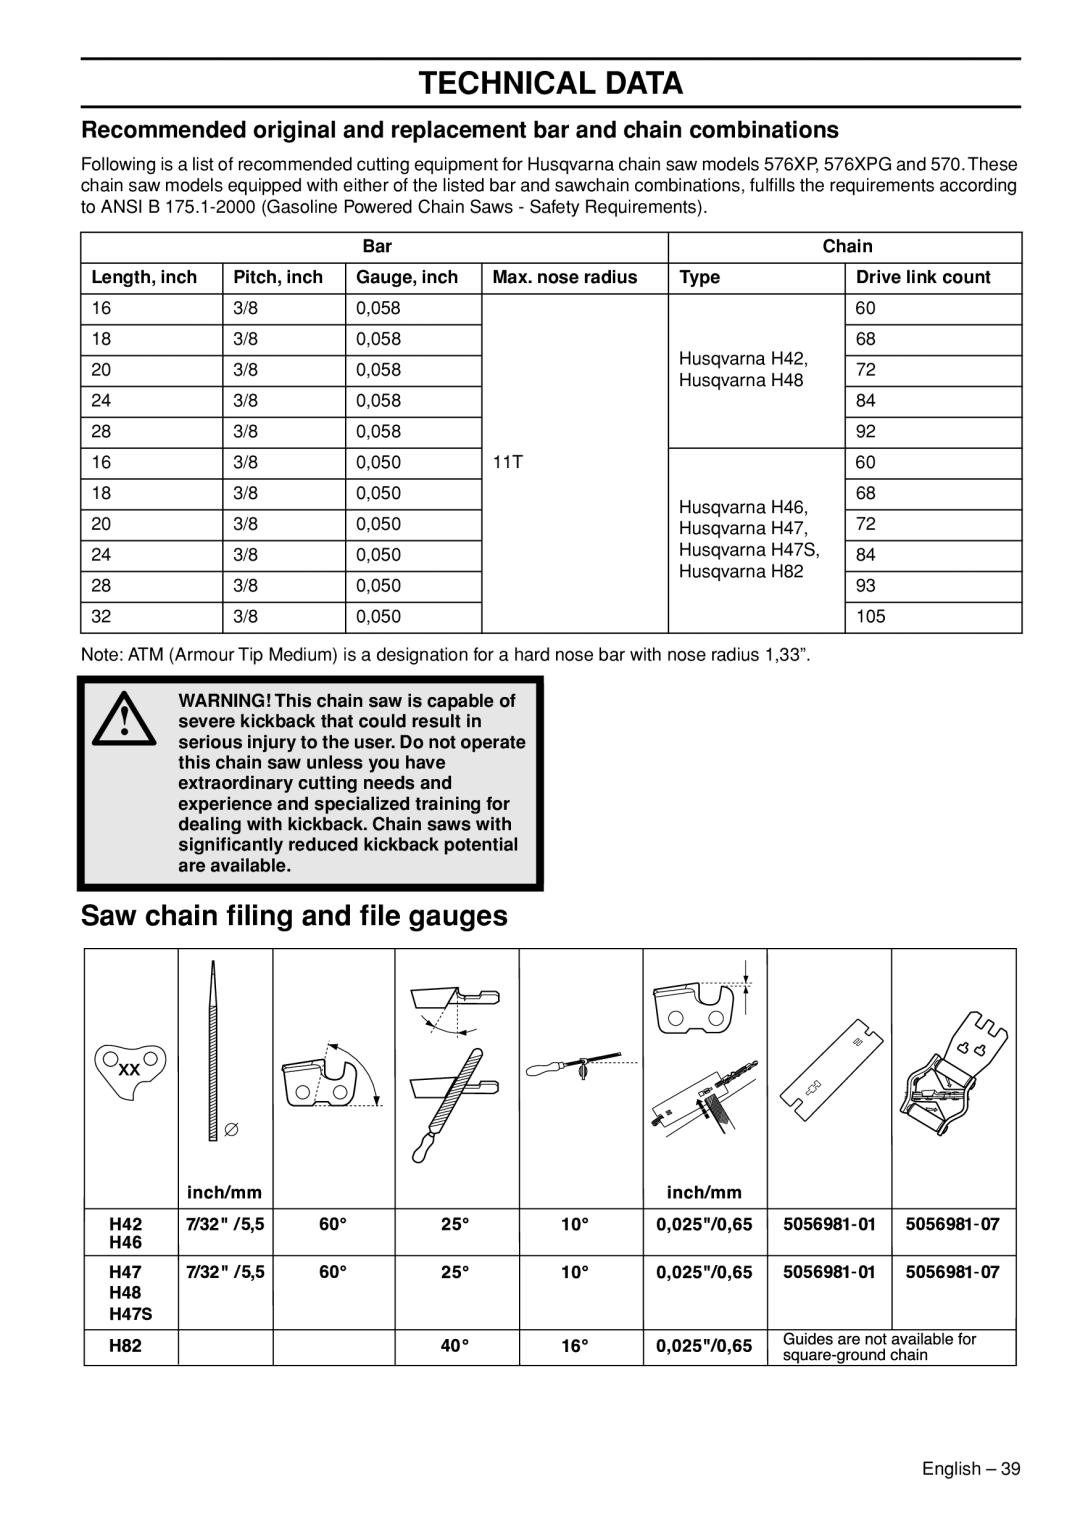 Husqvarna 576 XP EPA II Saw chain ﬁling and ﬁle gauges, Recommended original and replacement bar and chain combinations 